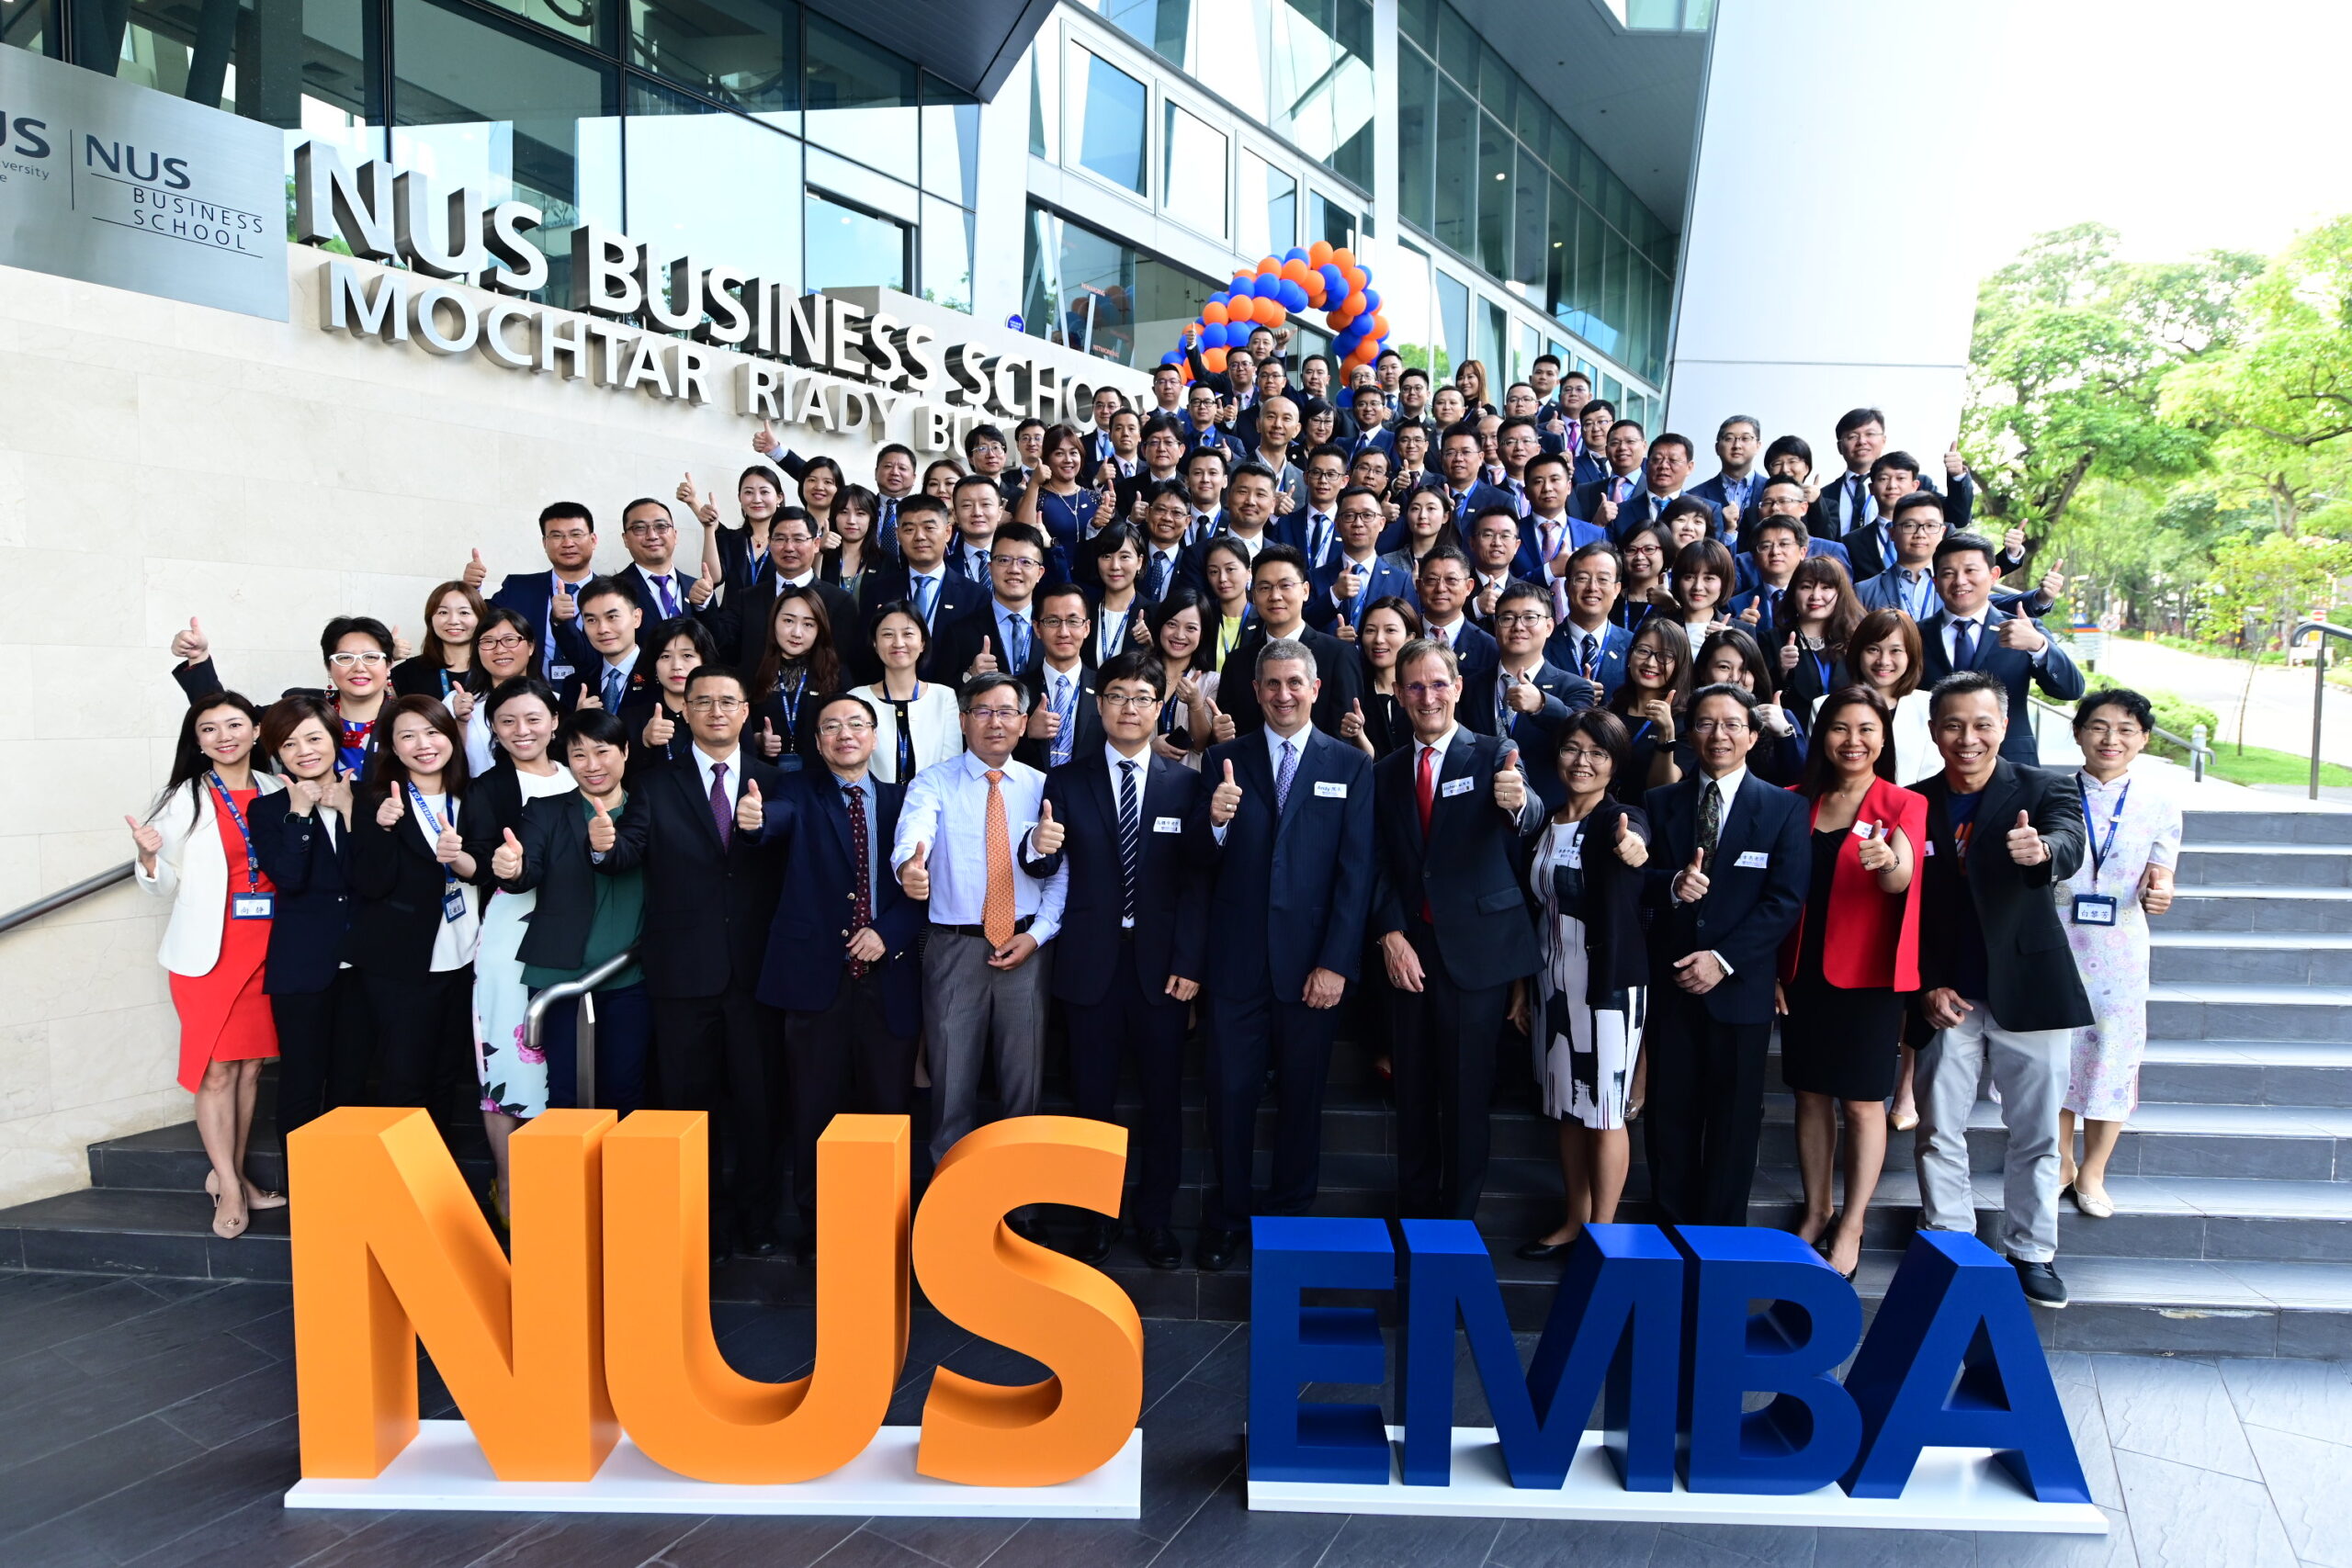 Alice's journey with the NUS EMBA community has been fruitful.